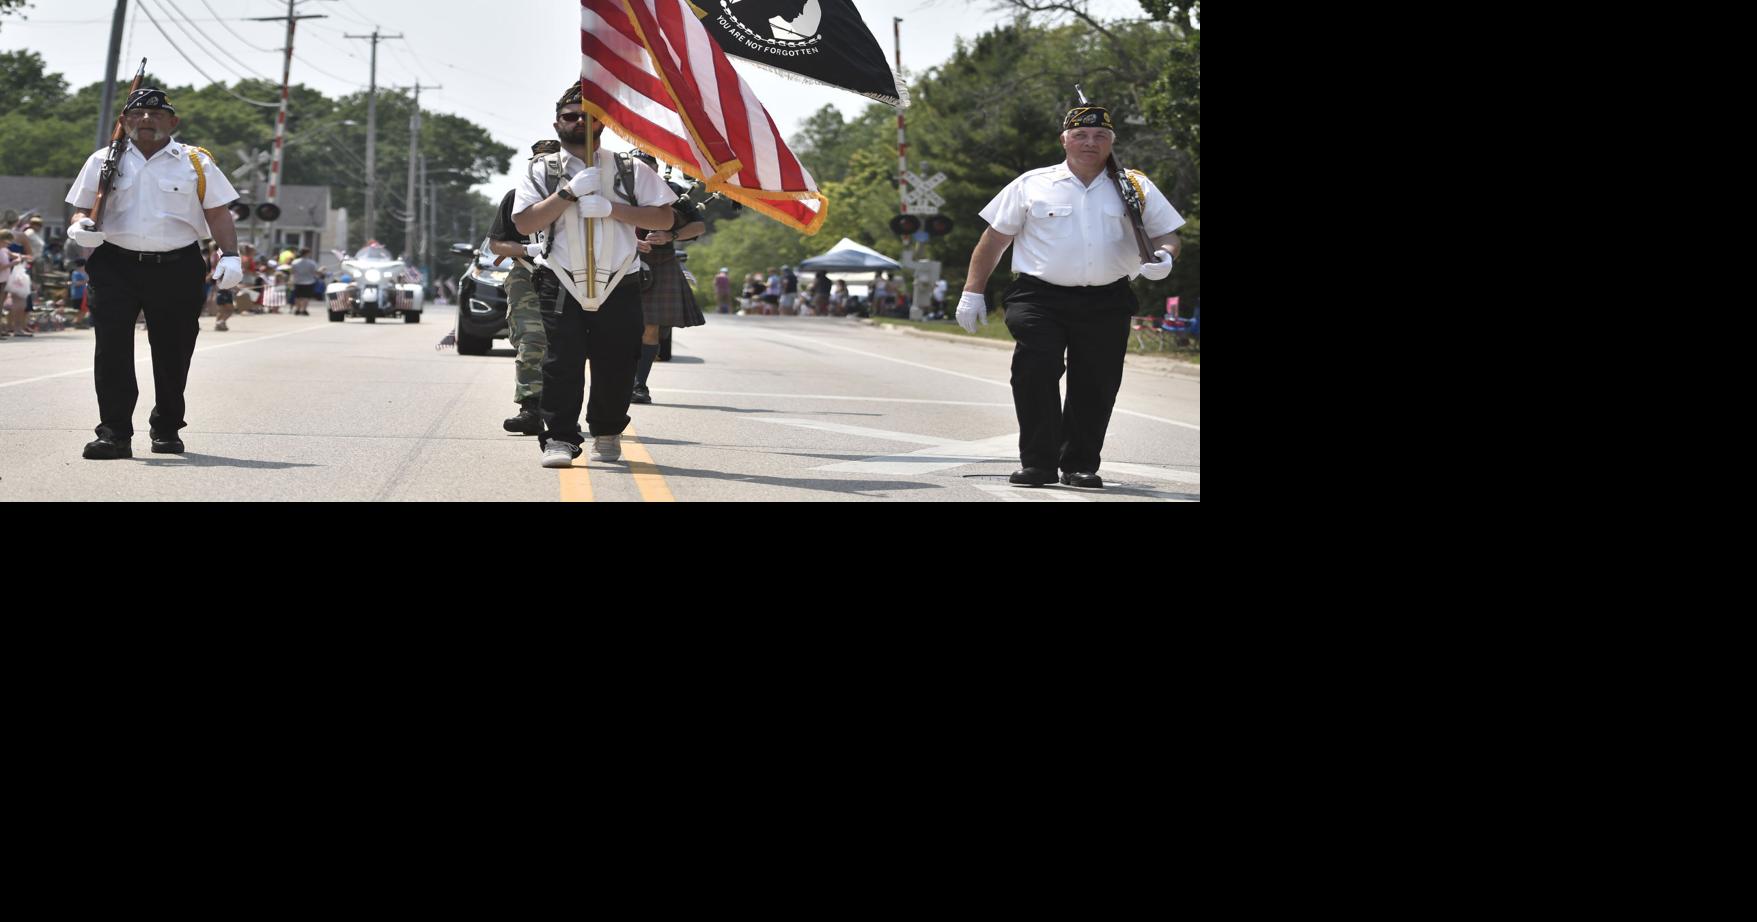 Somers Independence Day parade planning continues